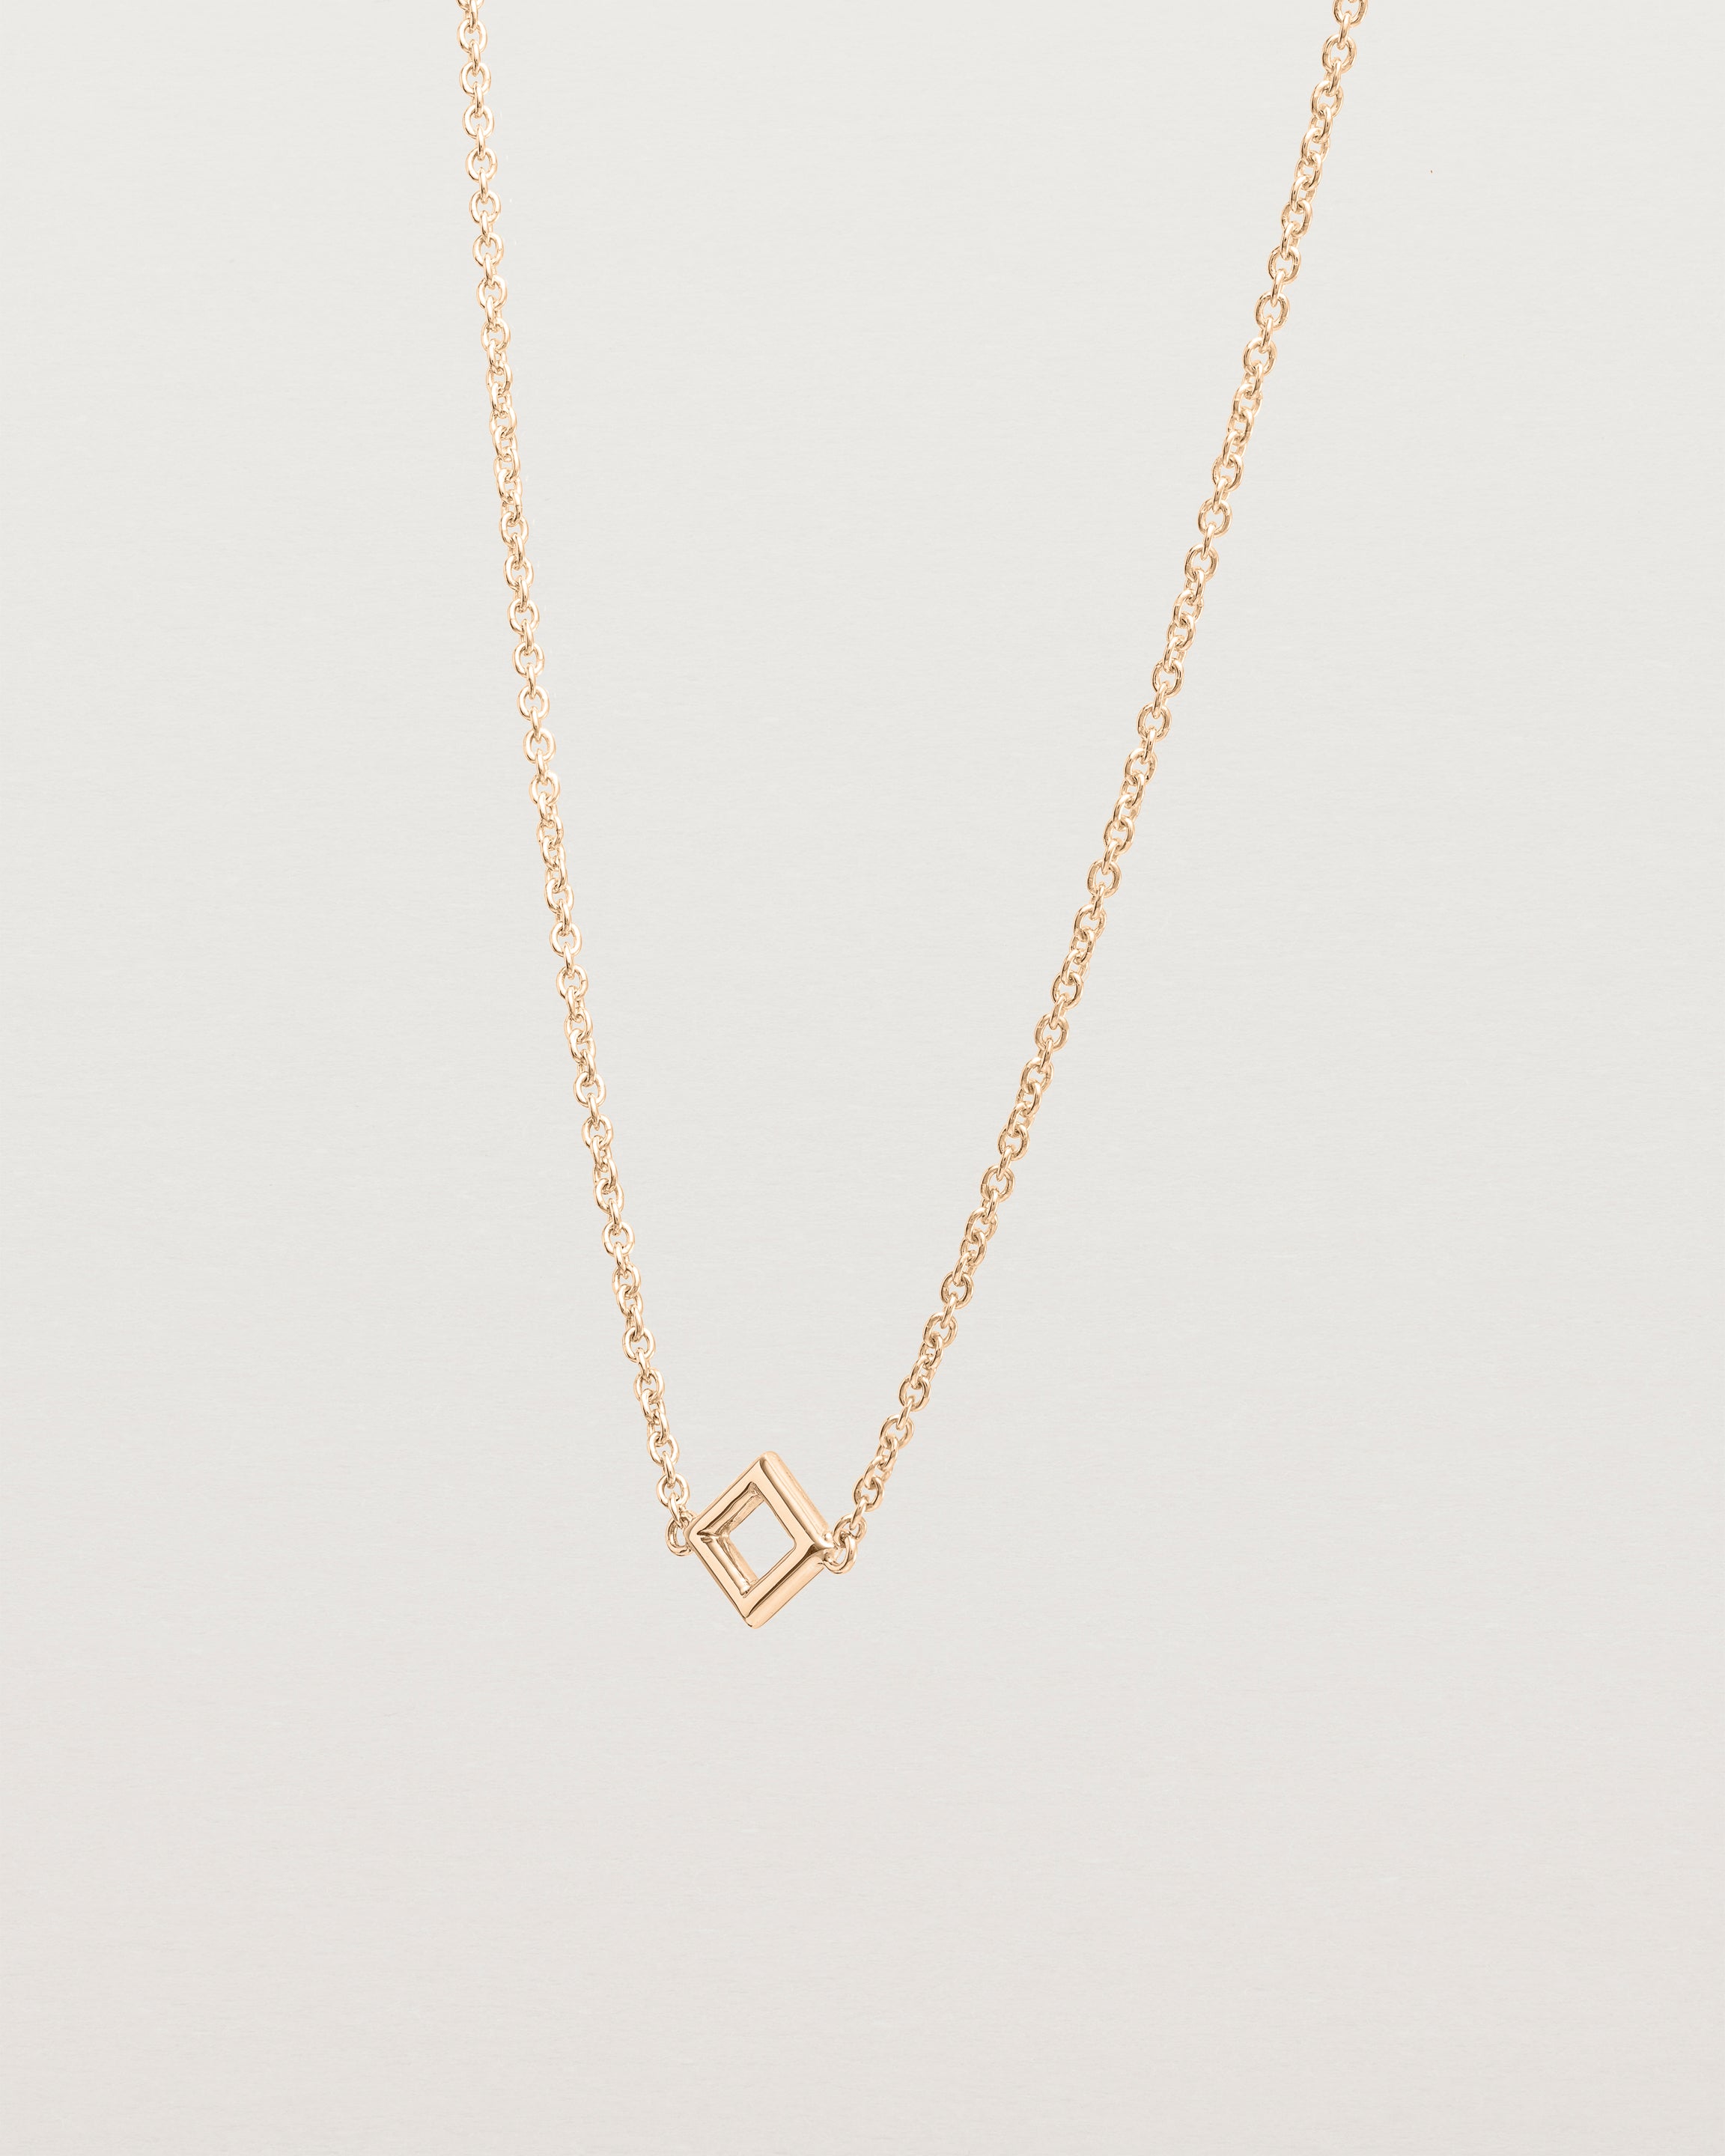 Angled view of the Nuna Necklace | Rose Gold.